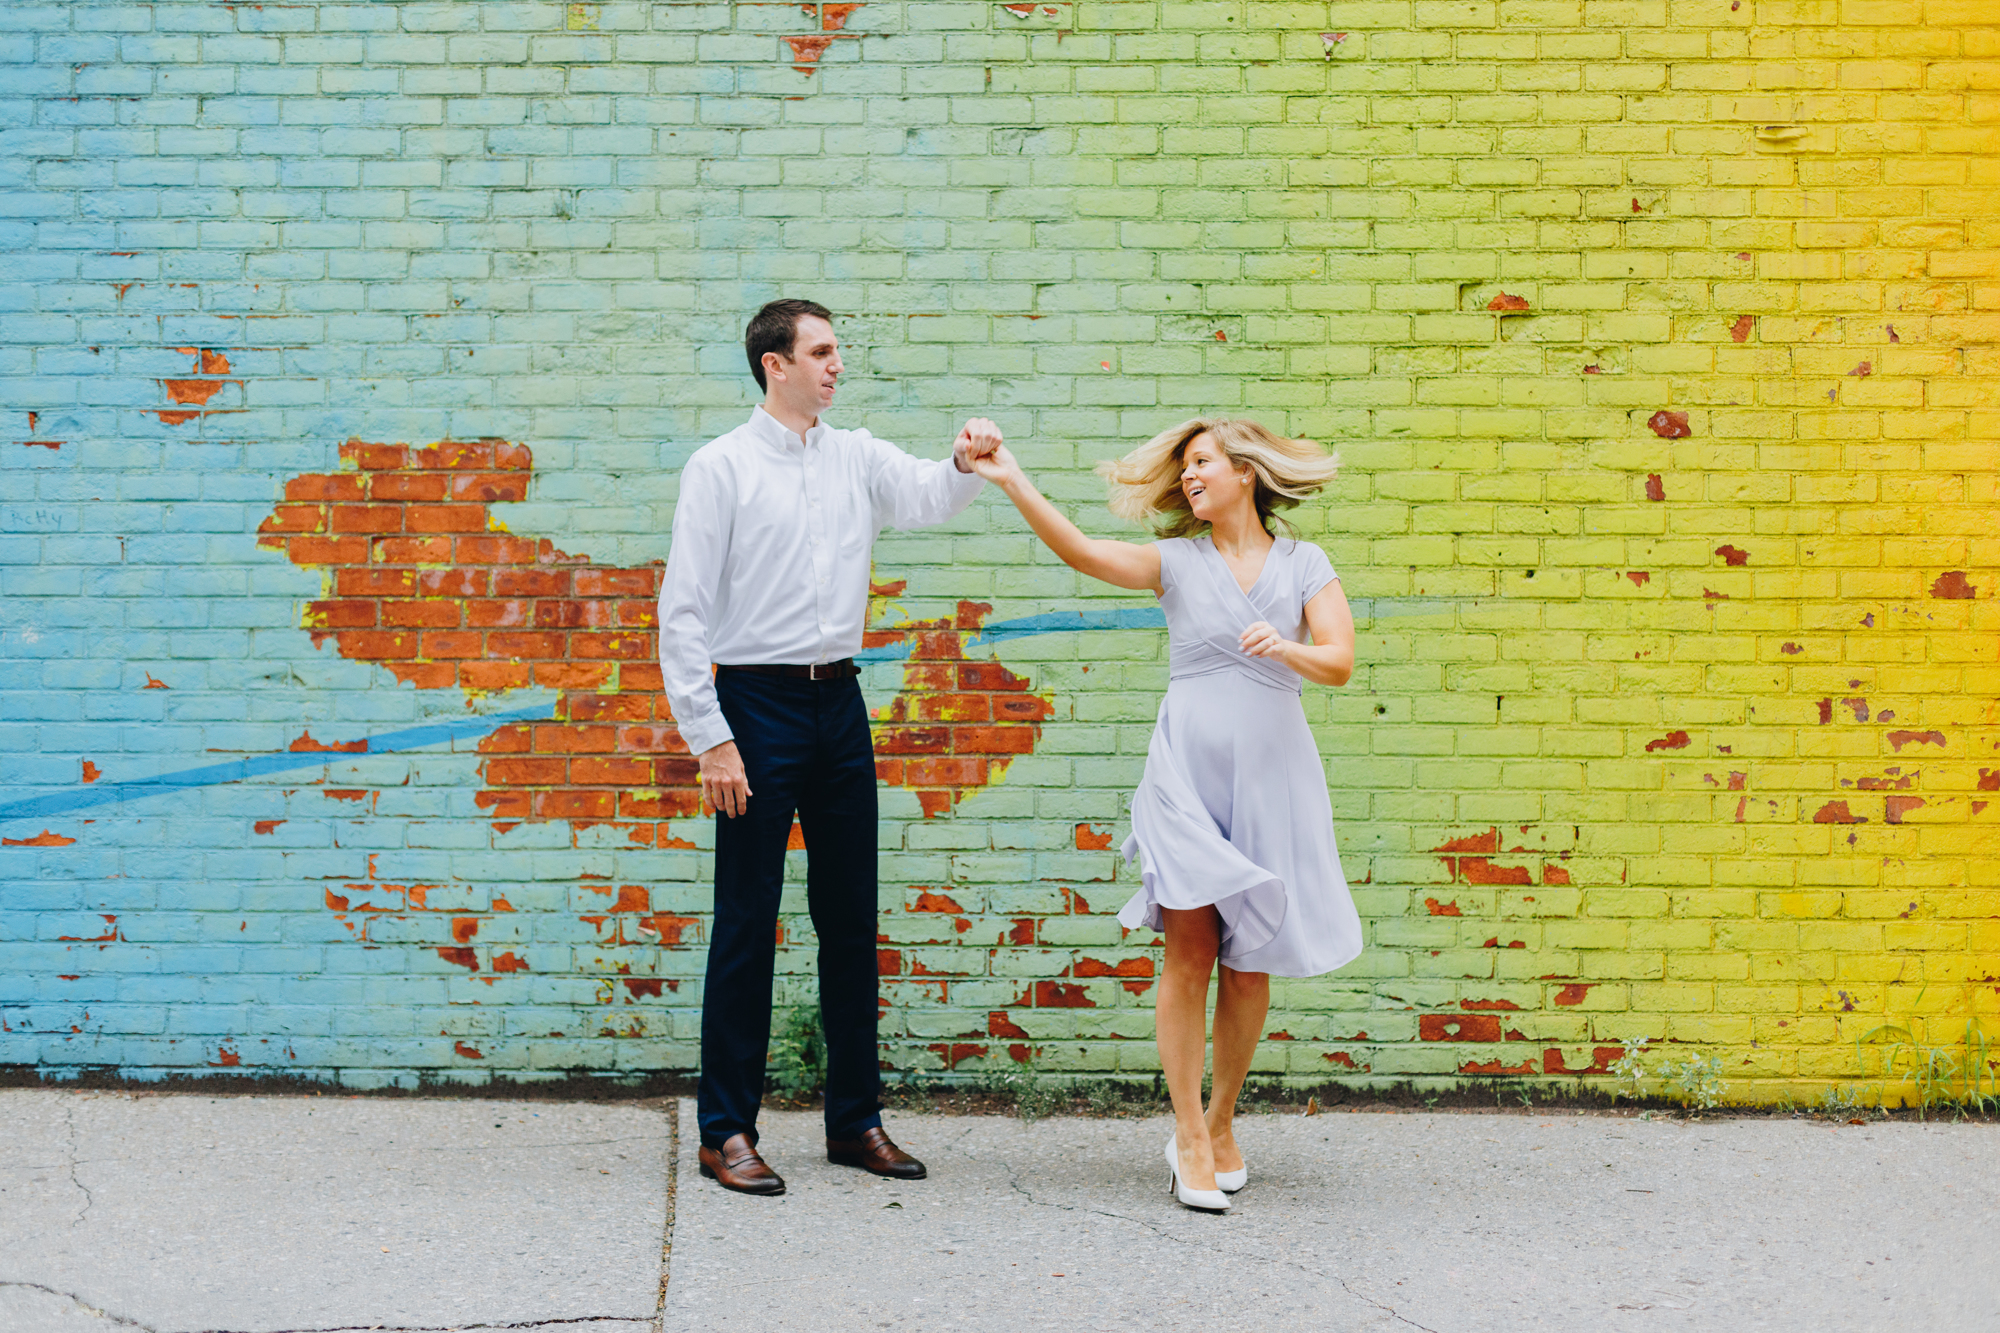 Colorful Brooklyn Bridge Park Engagement Photos on a Cloudy Day in New York